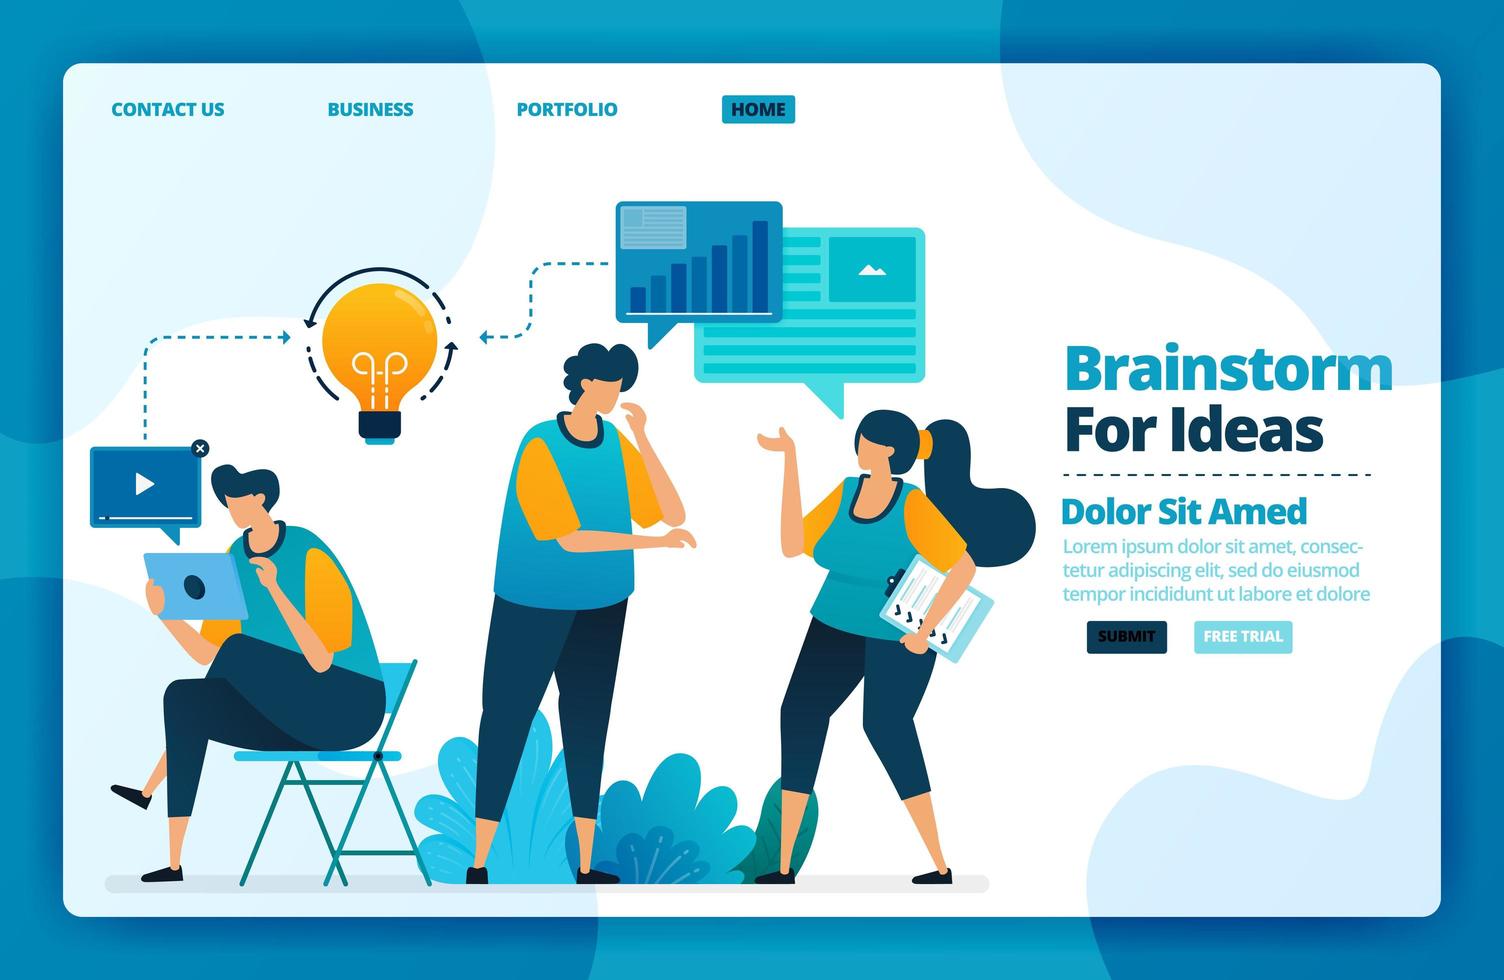 Landing page vector design of brainstorm for ideas. Design for website, web, banner, mobile apps, poster, brochure, template, billboard, welcome page, promotion, cover, business card, advertisement